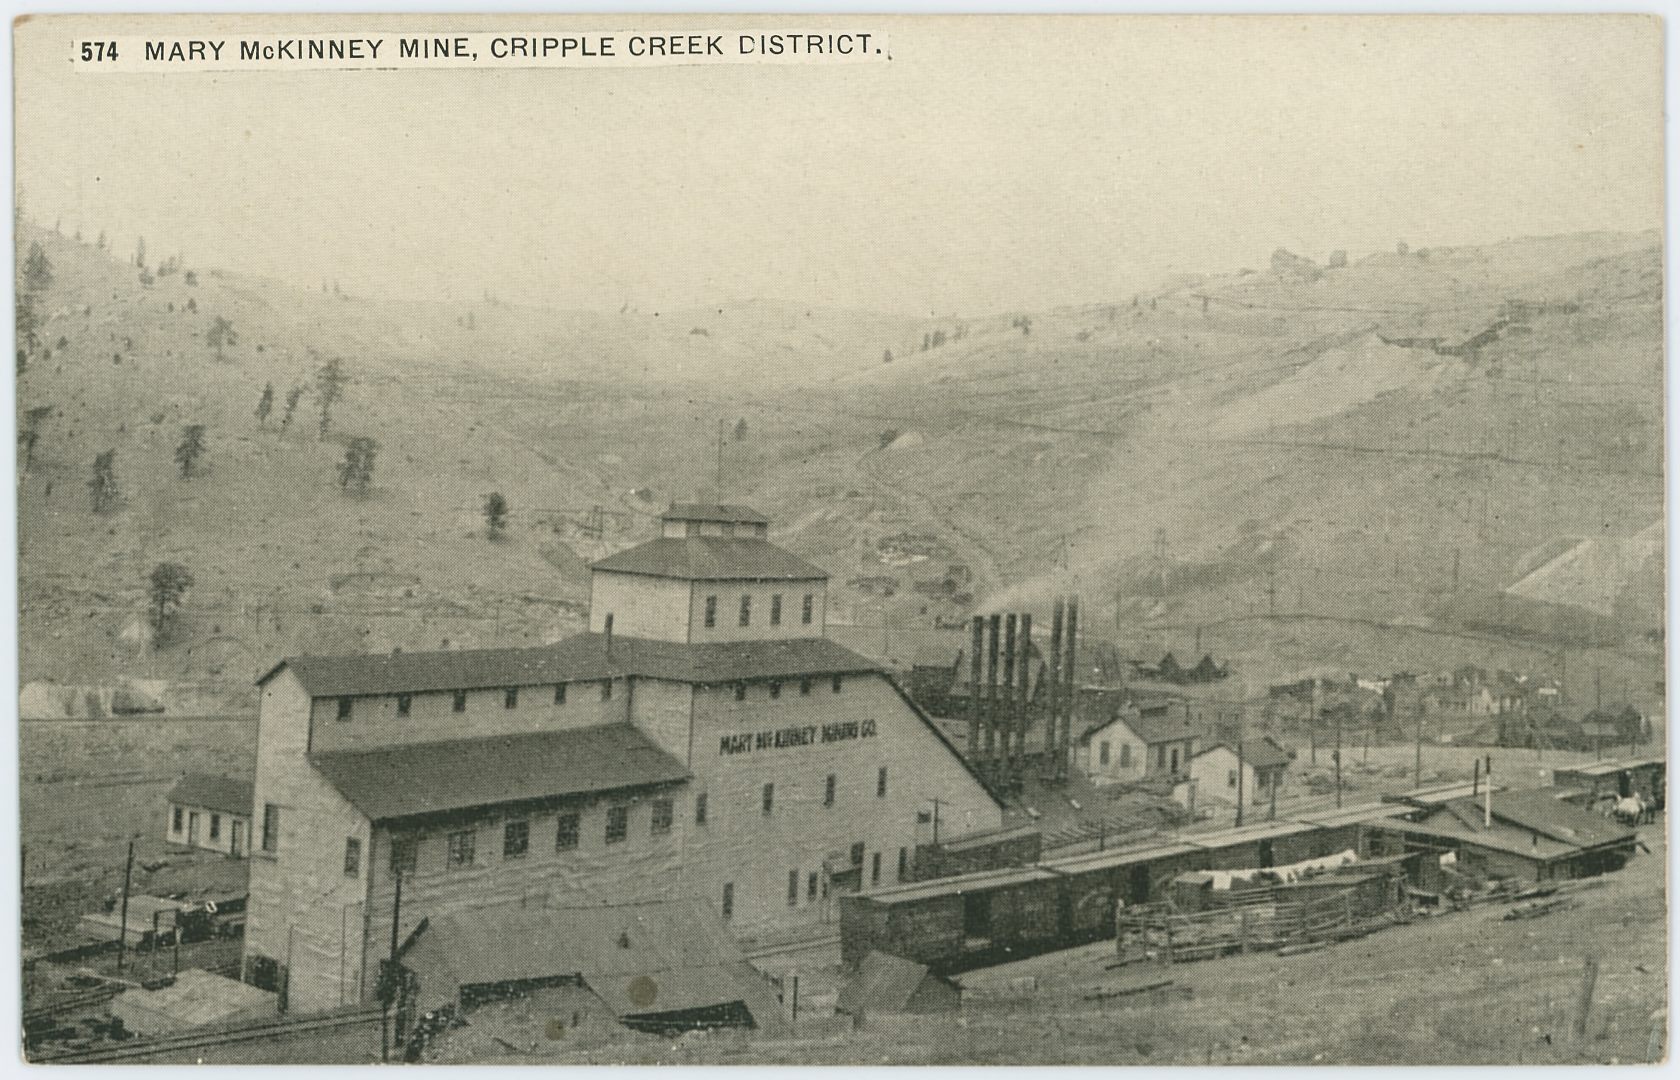 I've seen this image used three times, for this card and another postcard where there are a couple of extra millimeters visible on the right-hand side, plus I've seen it used in a postcard folder.
   The view is from the railroad side of the Mary McKinney mine, showing several box cars parked on sidings nearby and at the mine itself. It also shows part of Anaconda at right-hand side about 1/3 up from bottom, the part that survived the 1904 fire, as I see no signs of structures at left side of image, and I believe there should been visible something there if the town was still there.
   The tracks in the foreground belong to the Midland Terminal, but the Mary McKinney mine was once served by dual gauge as the F. & C.C was also having a spur to the mine, entering in from left-hand side, running parallel with the Shaft House to serve that and the coal bins at the power plant seen with all those smokestacks to the right of the shaft-house.
   Behind the smokestacks of the Power House of the Mary McKinney you can see the Ore House of the Anaconda Mine, located down by the F. & C.C. yard in Anaconda, but image is too bad to really make out any details. Which is sad, as up on Gold Hill seen in the background, there is seen the Shaft House of the Anchoria-Leland about 1/4 in from right-hand side and about same from top, with the Ore-House and trestle of the Lexington Mine seen just to the right of the Anchoria-Leland.
   Or even more sad, there is visible a mill on the hill side above the Low Line grade, seen about  1/3 down from top and 1/7 in from right-hand side, a mill I believe might be known as Anaconda Mill, but I might be mistaken where that mill was located as info been a little scarce, but it fit the location of west slope Gold Hill.